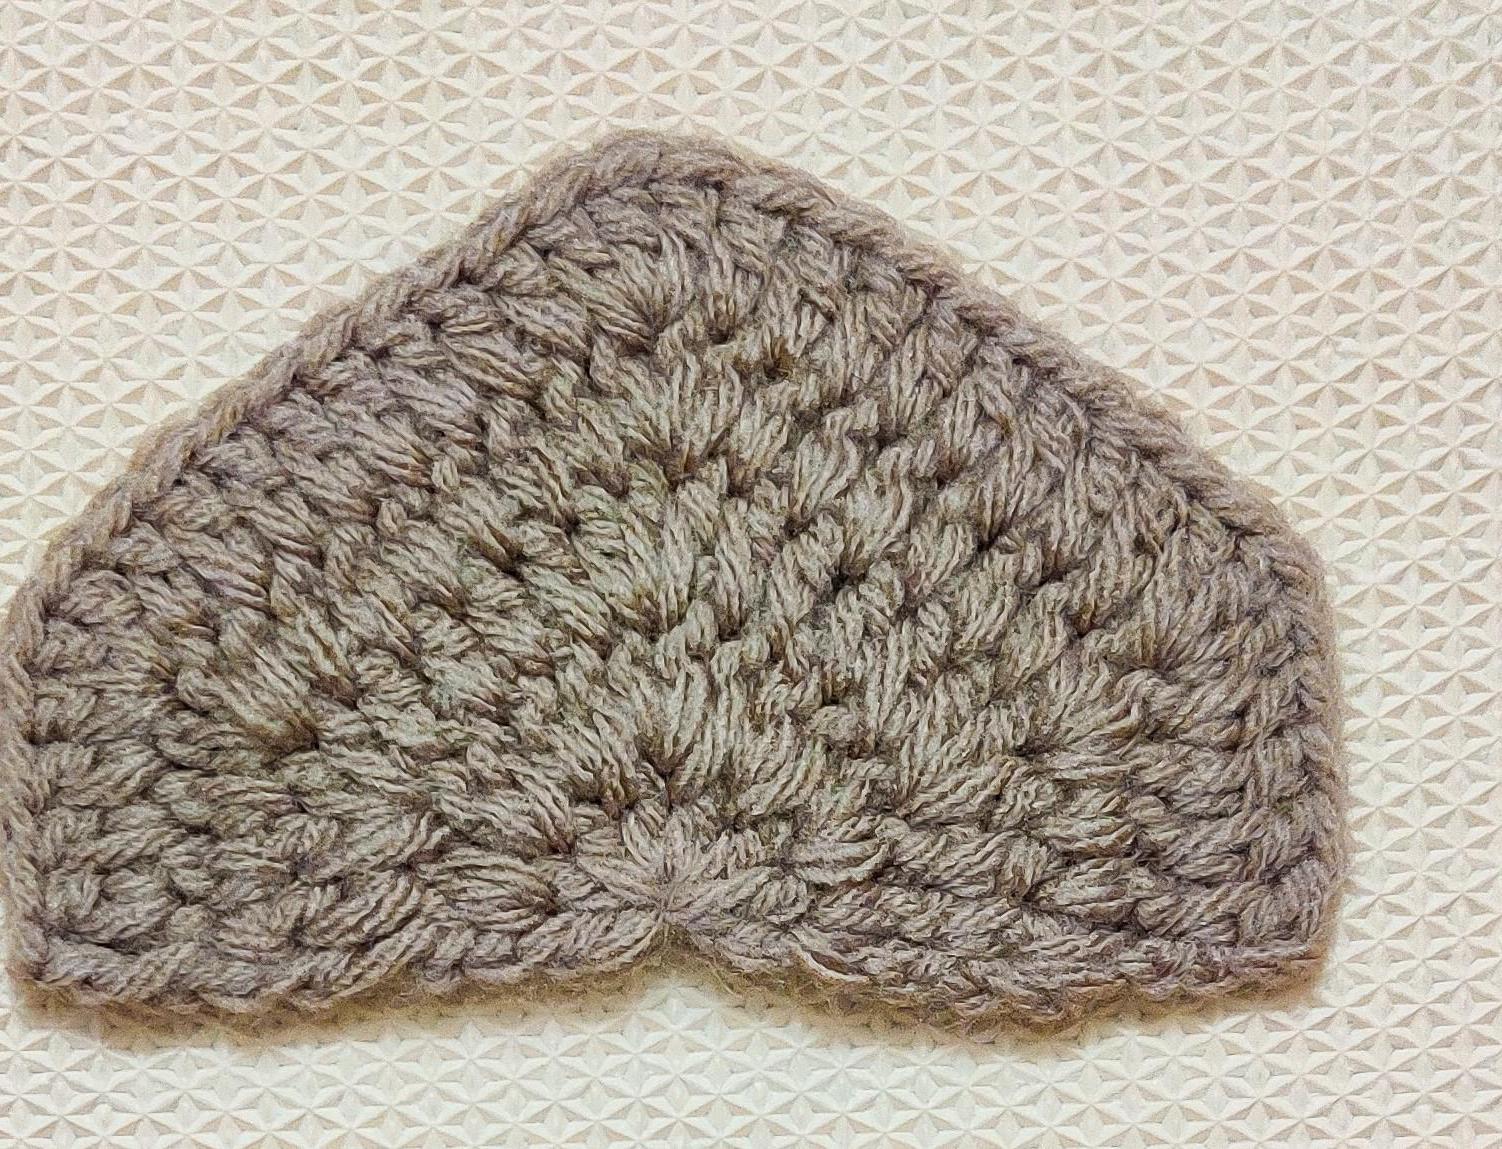 How to Make a Pointed Crochet Solid Half Hexagon